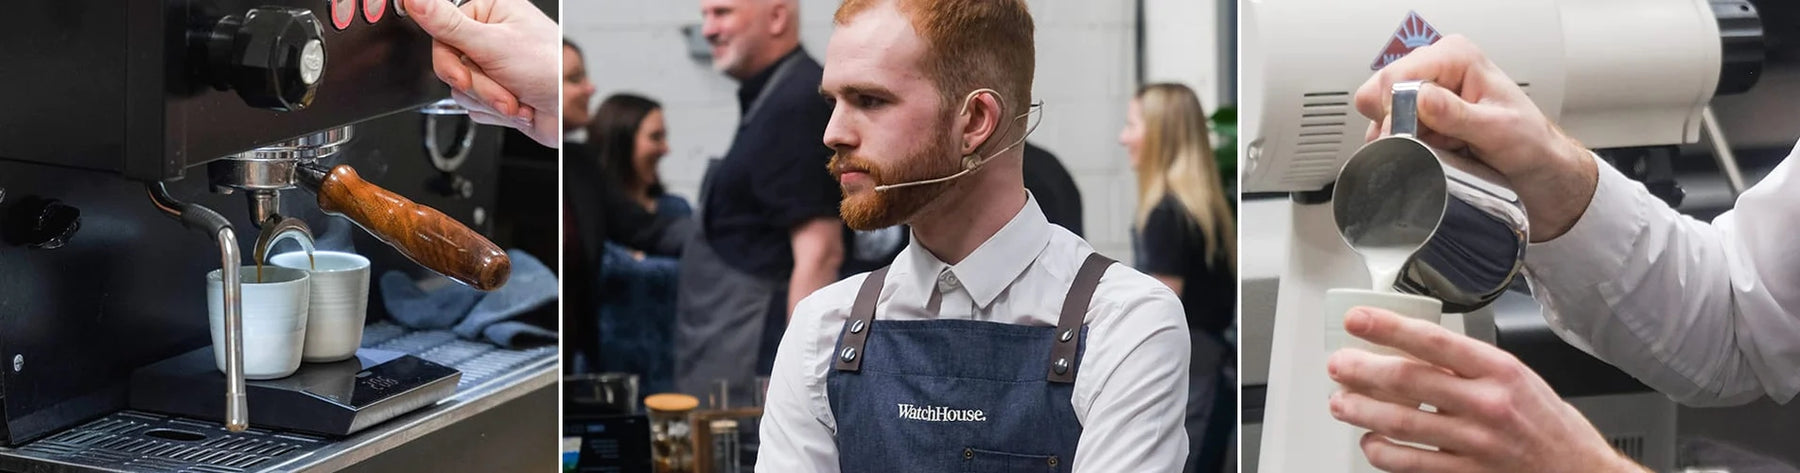 A catch up with Ted Longden - 2022 UK Barista Championship